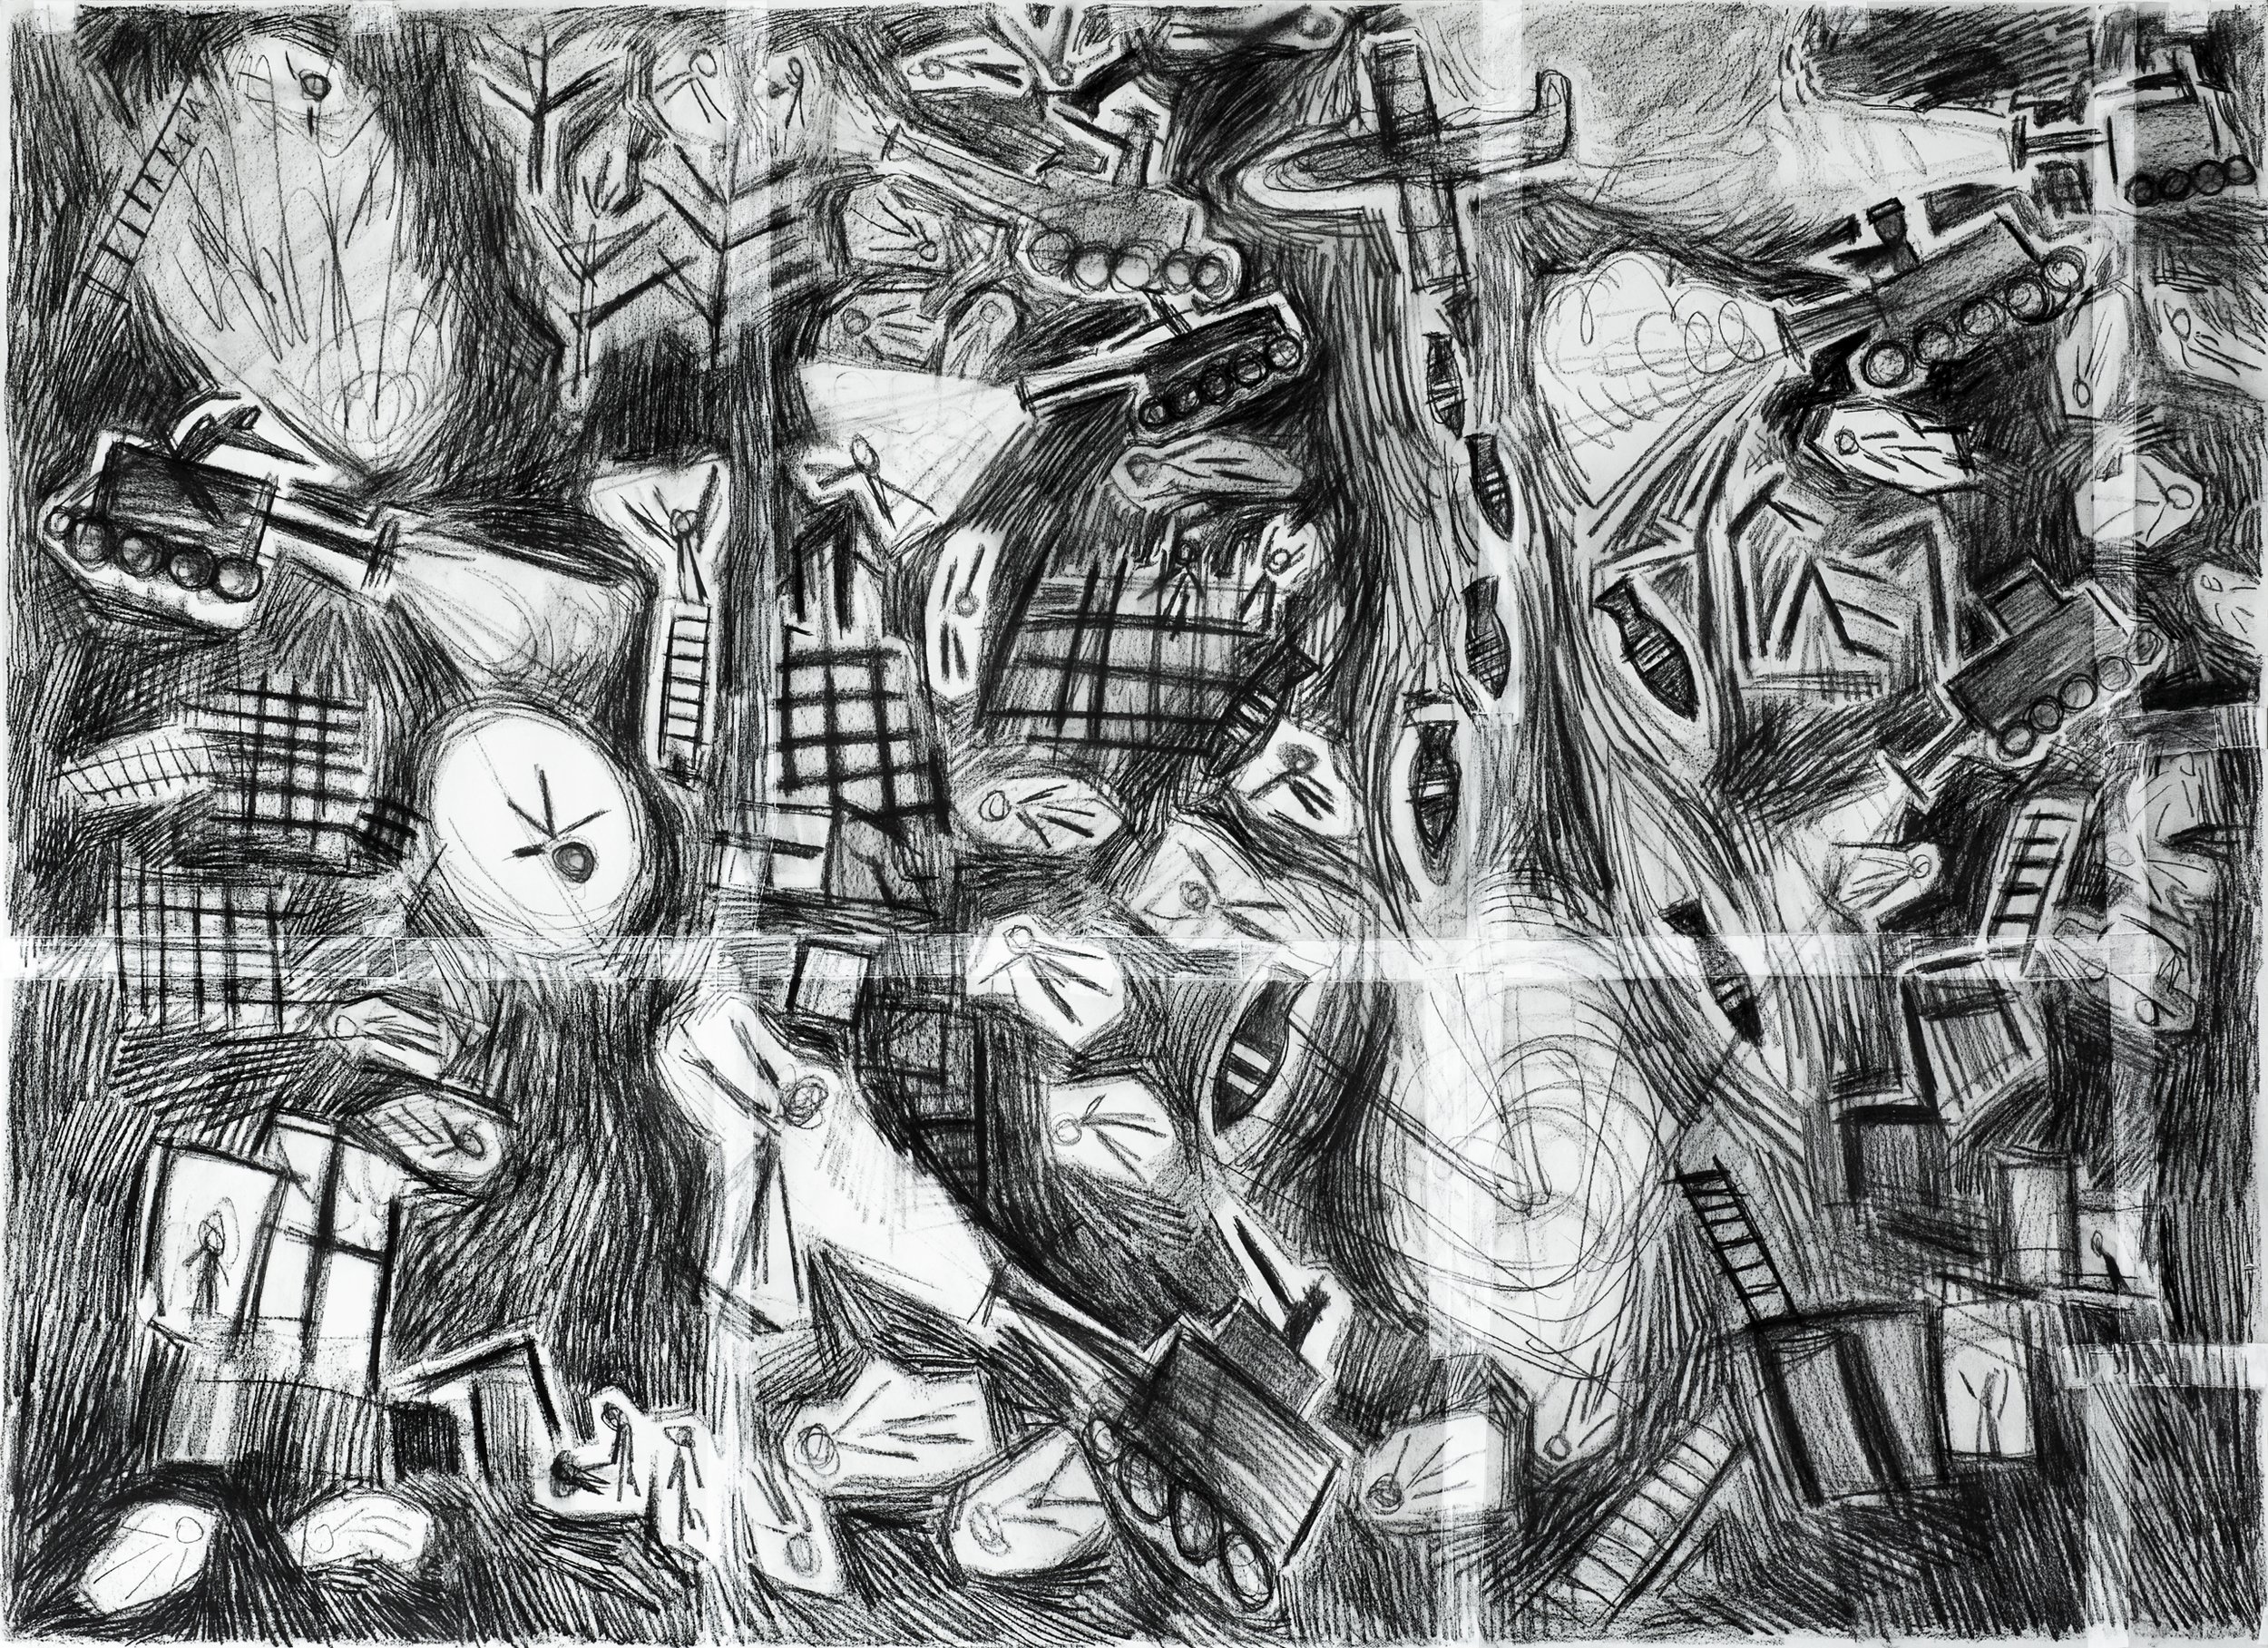 Large Study for "Papa, Is It Going to Be a War?", 2022 - charcoal and artist tape on newsprint, 55x40in